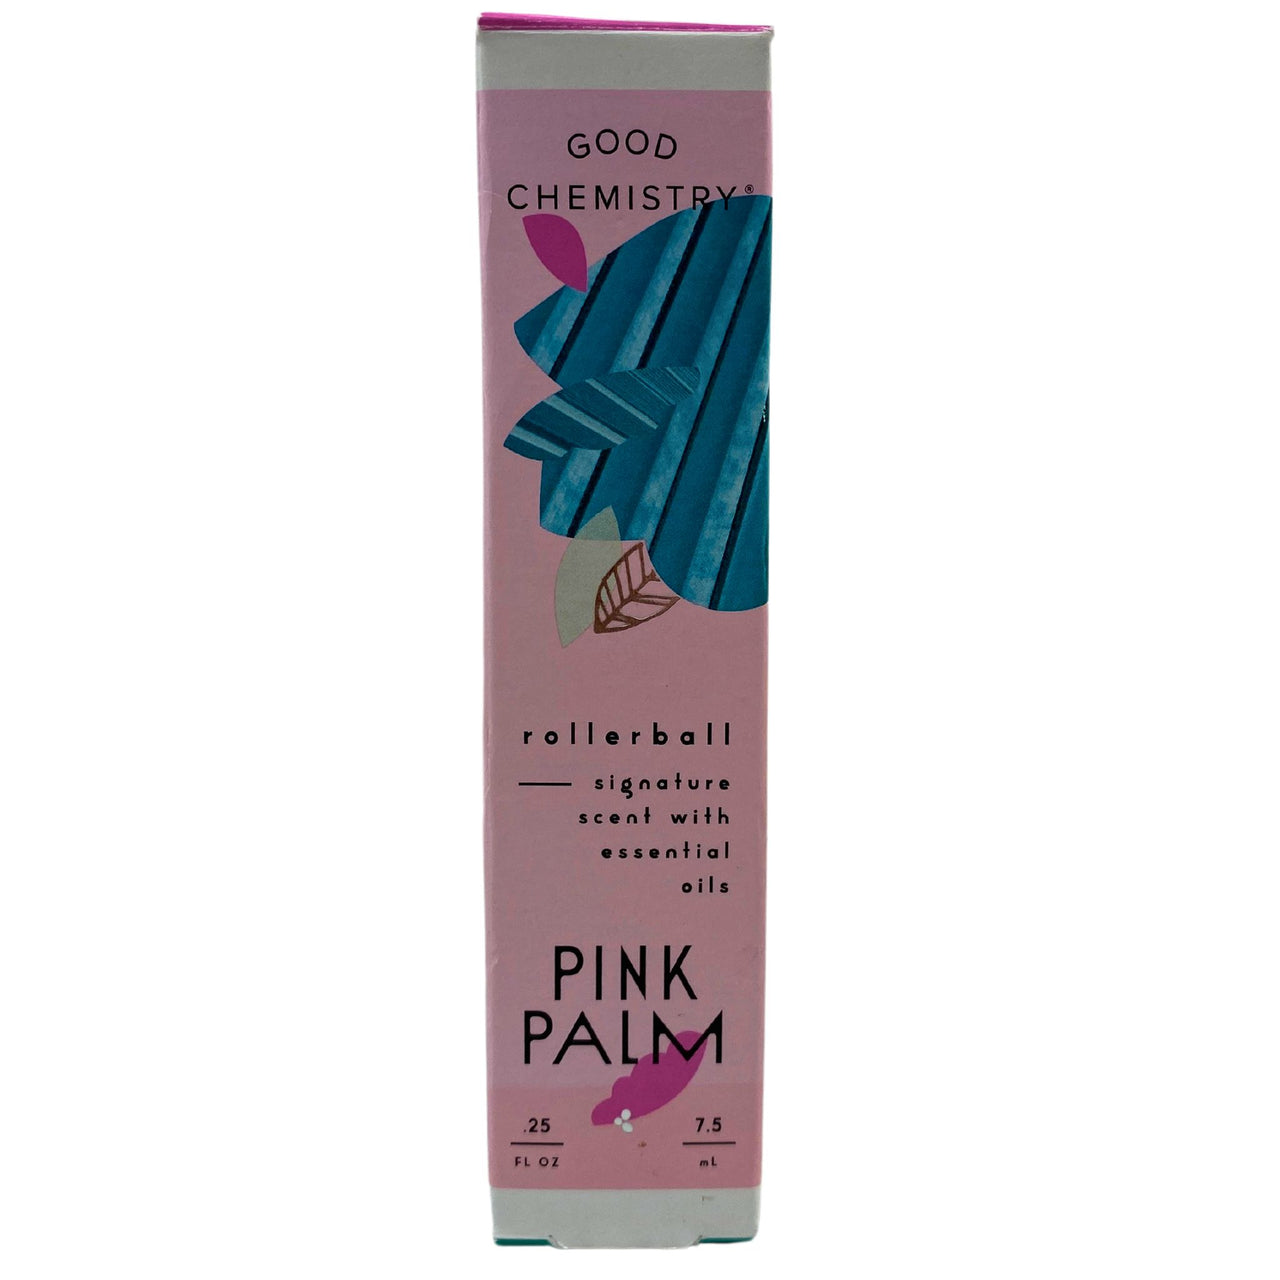 Good Chemistry Rollerball Signature Scent with Essential Oils 